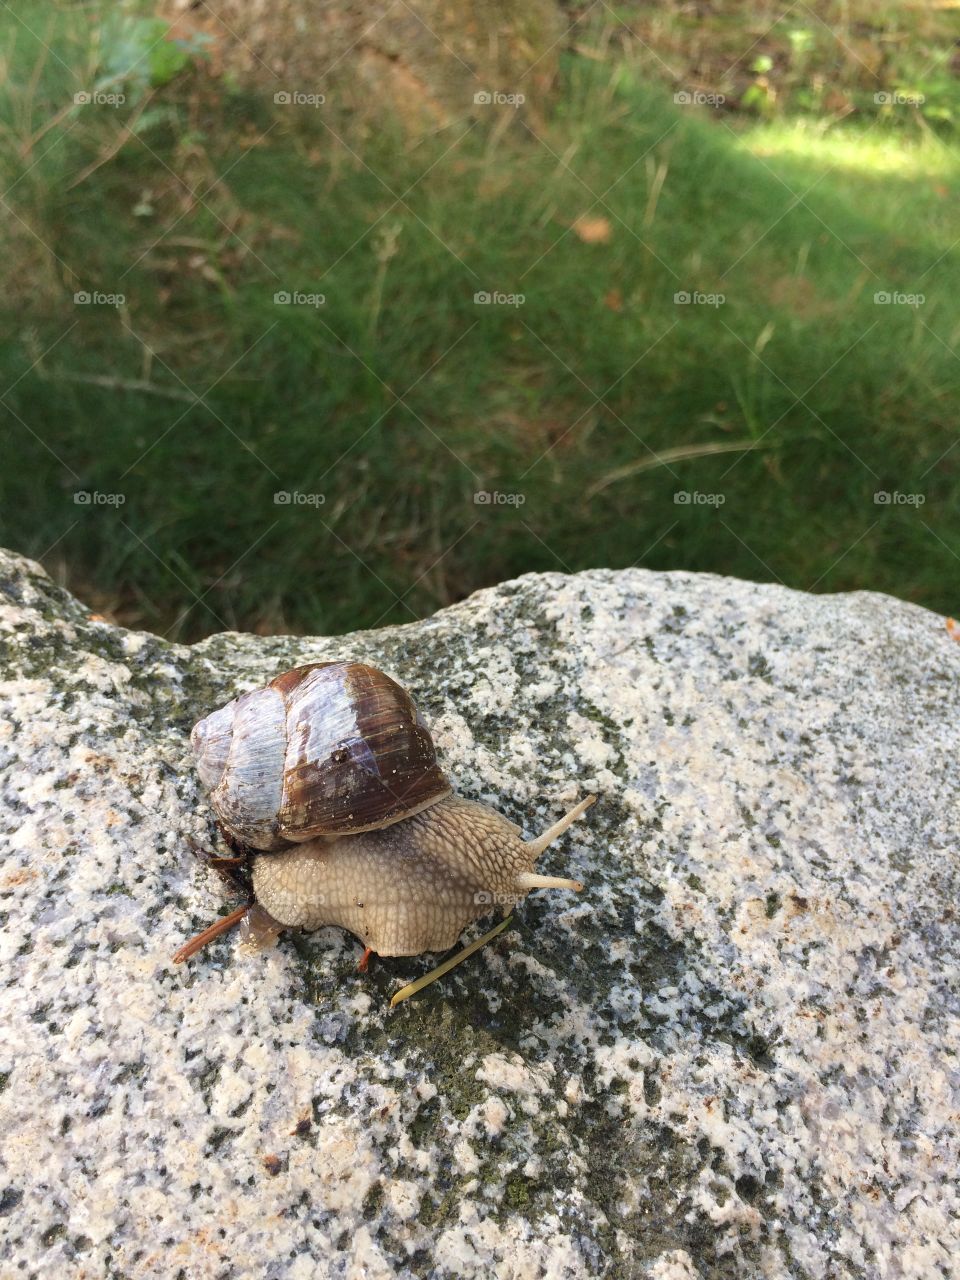 Snail on his way